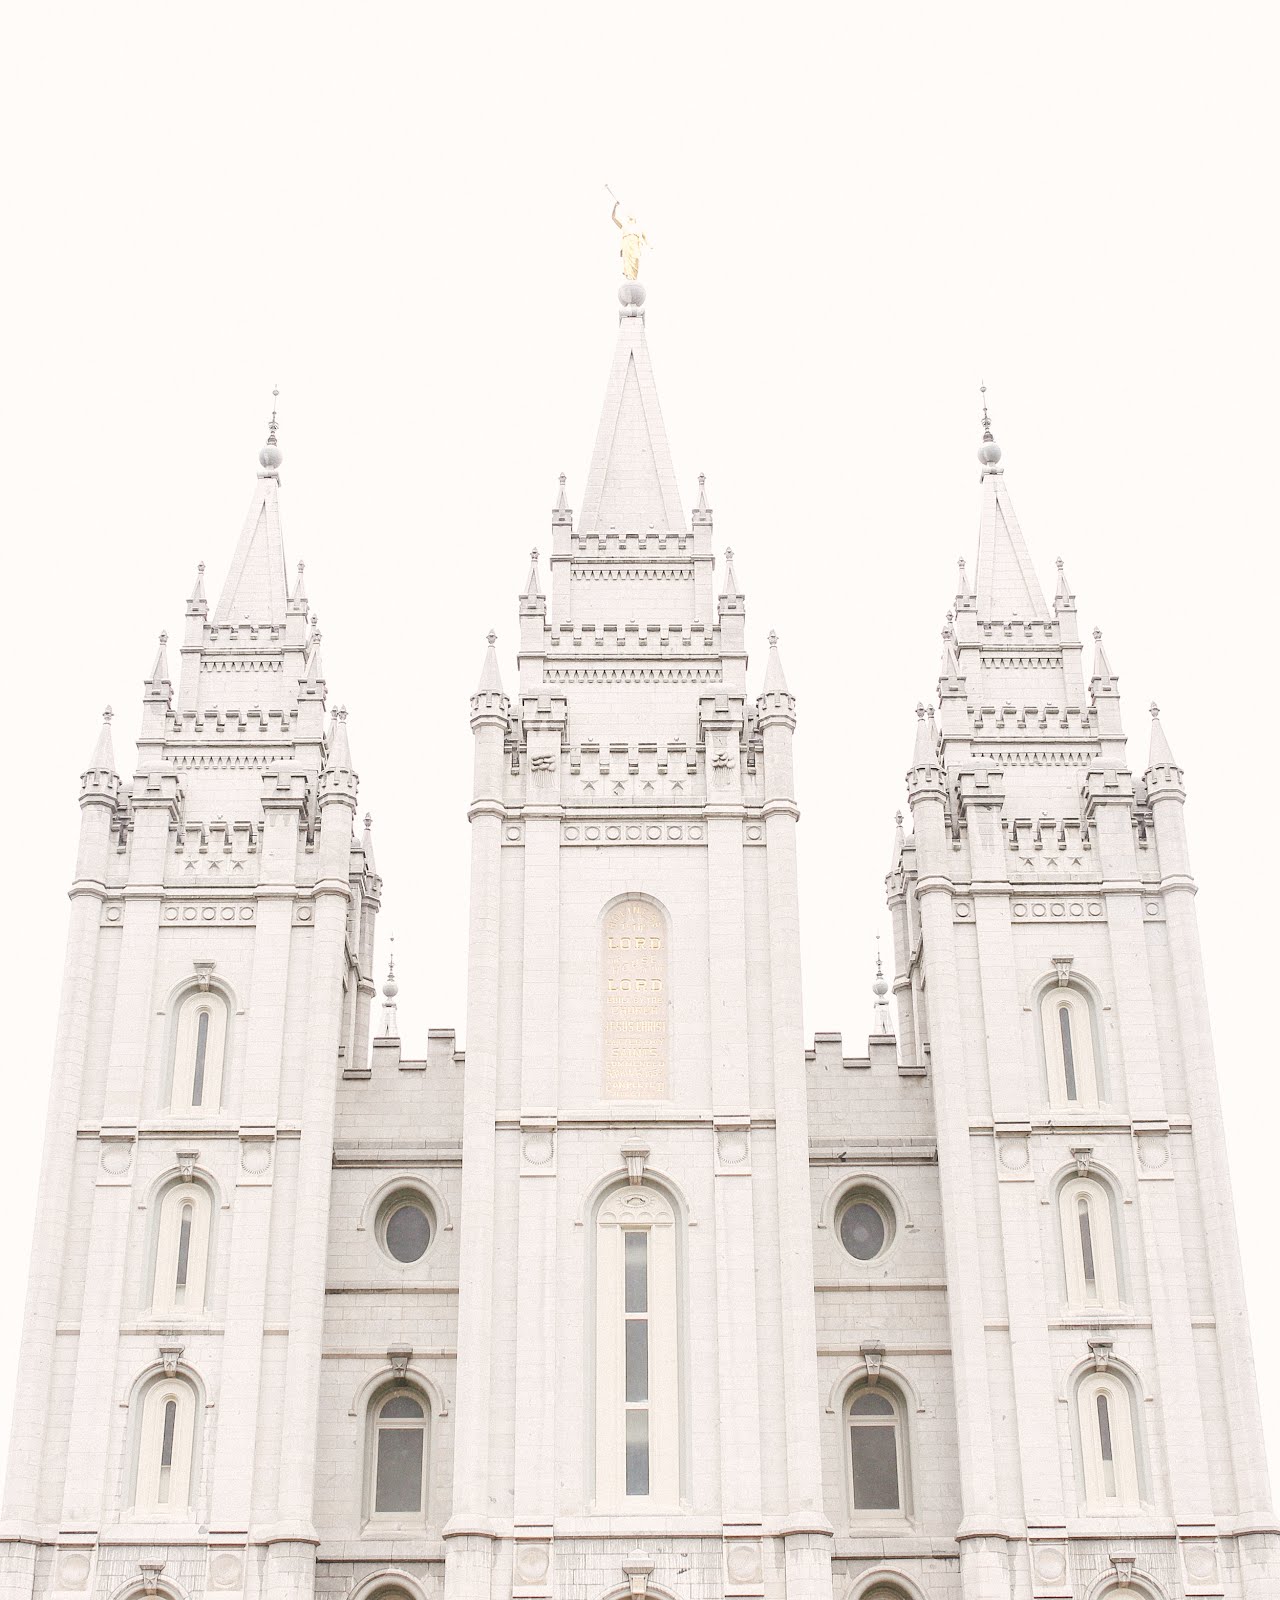 Learn more about the LDS church